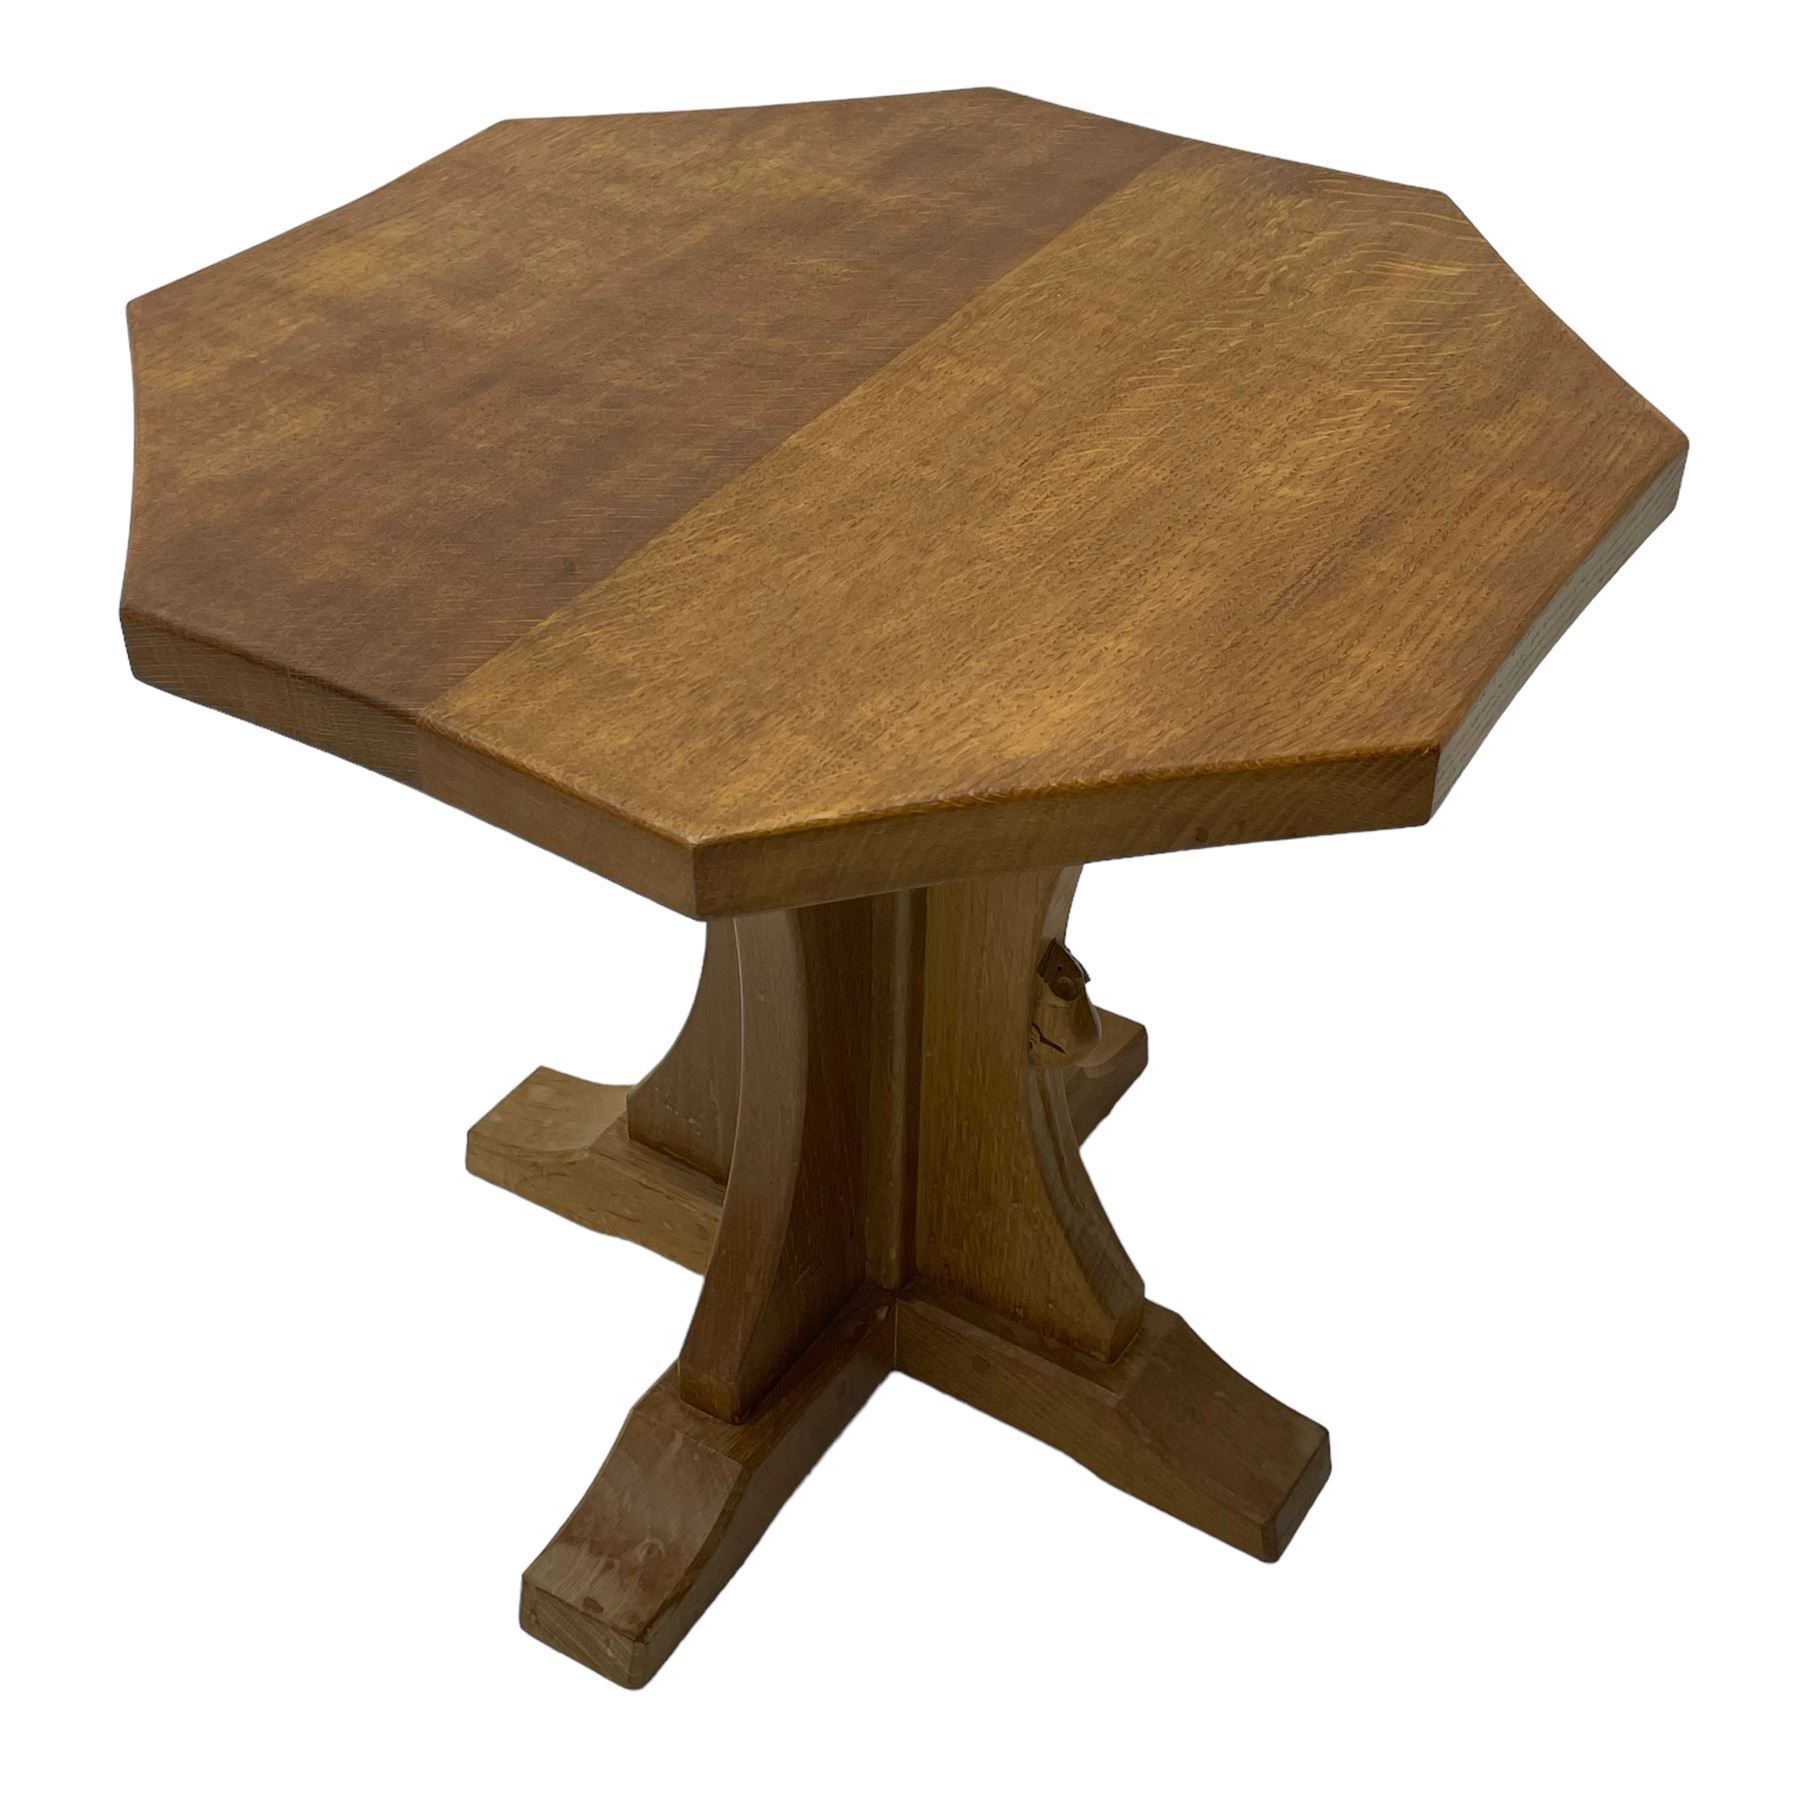 Mouseman - oak occasional table - Image 5 of 7